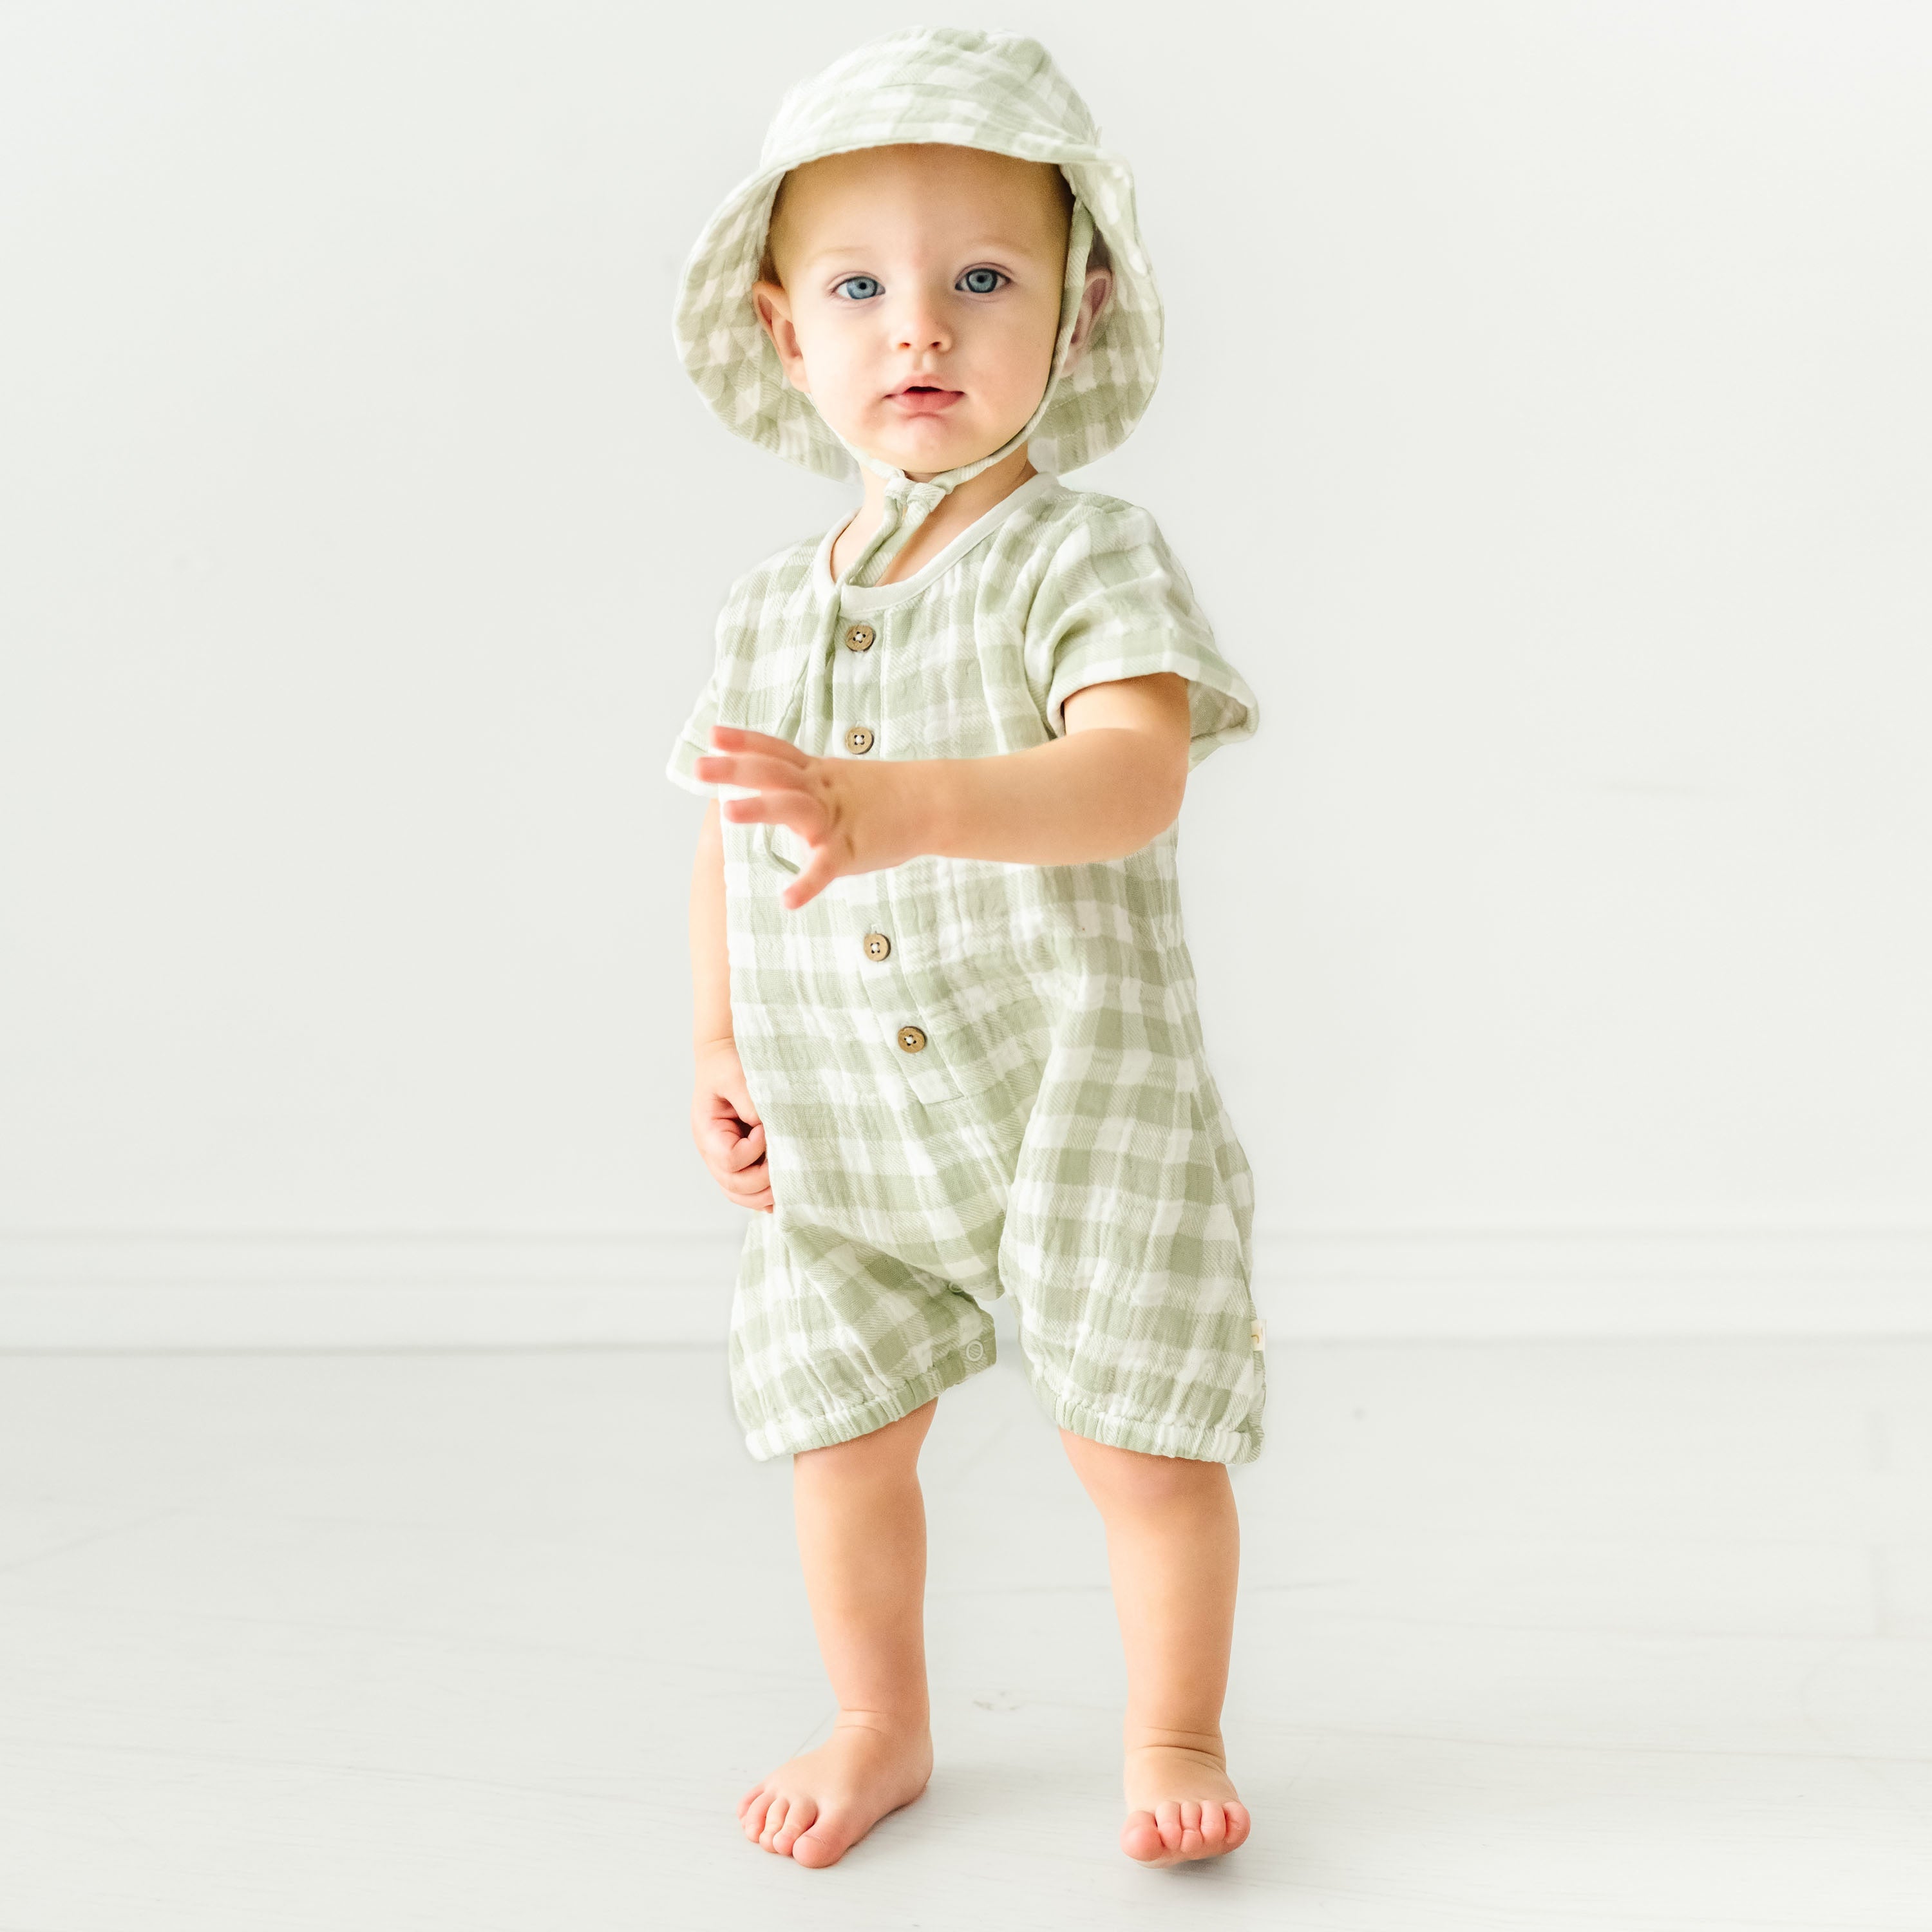 A toddler girl wearing a Makemake Organics Organic Muslin Short Bubble Romper - Gingham and matching sun hat stands on a white background, looking curiously at the camera.